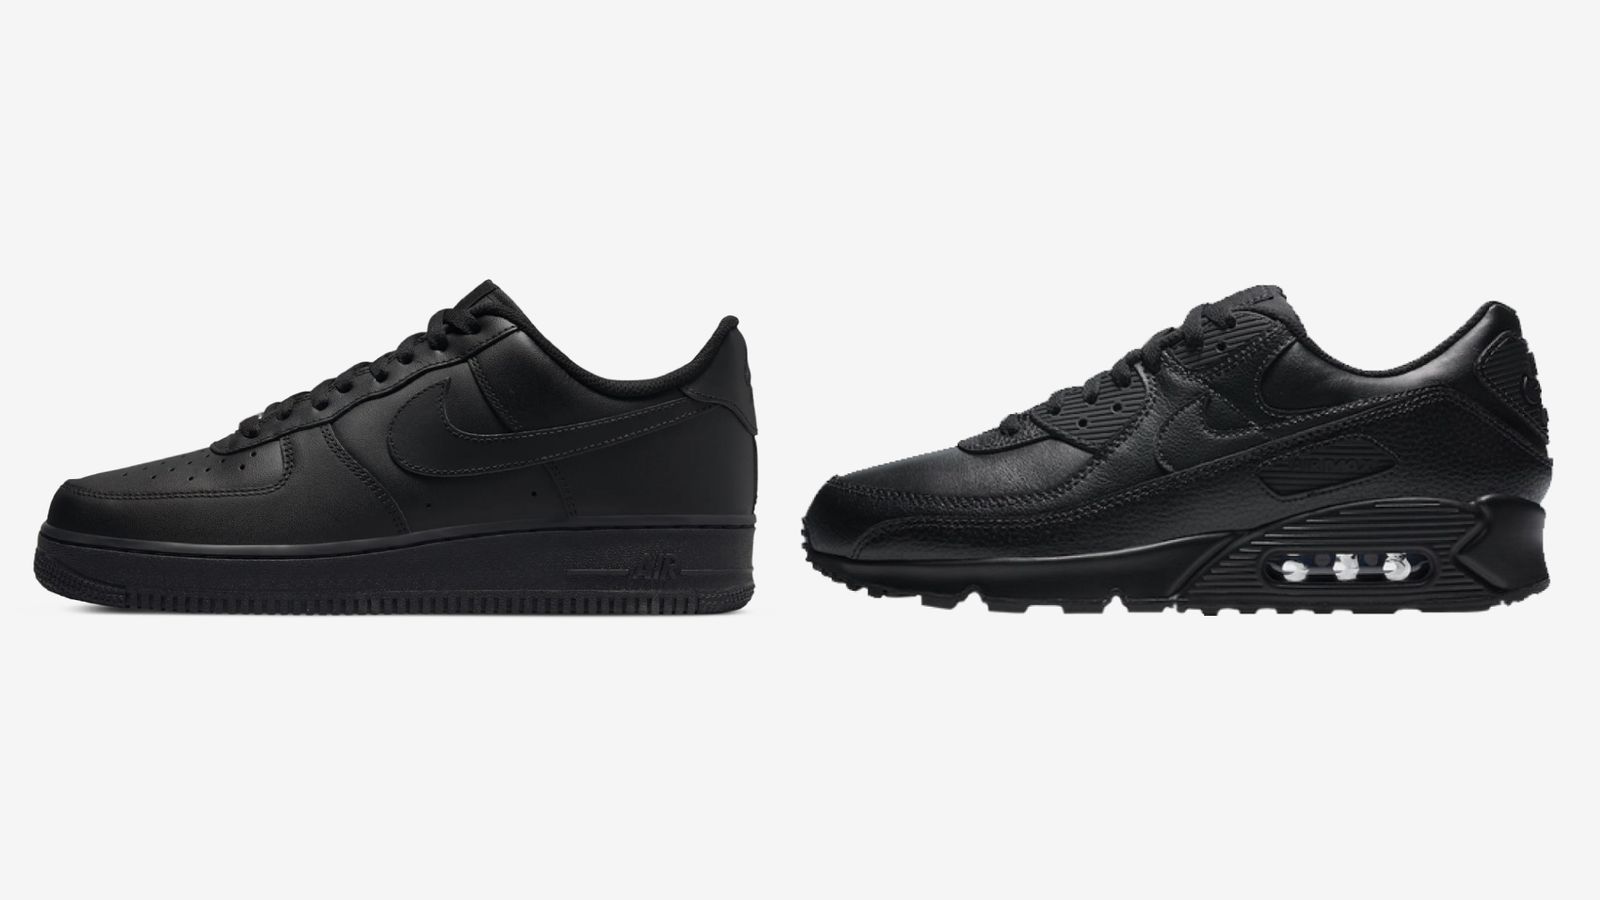 Nike Air Max 90 product image of a black sneaker next to an all-black Air Force 1.